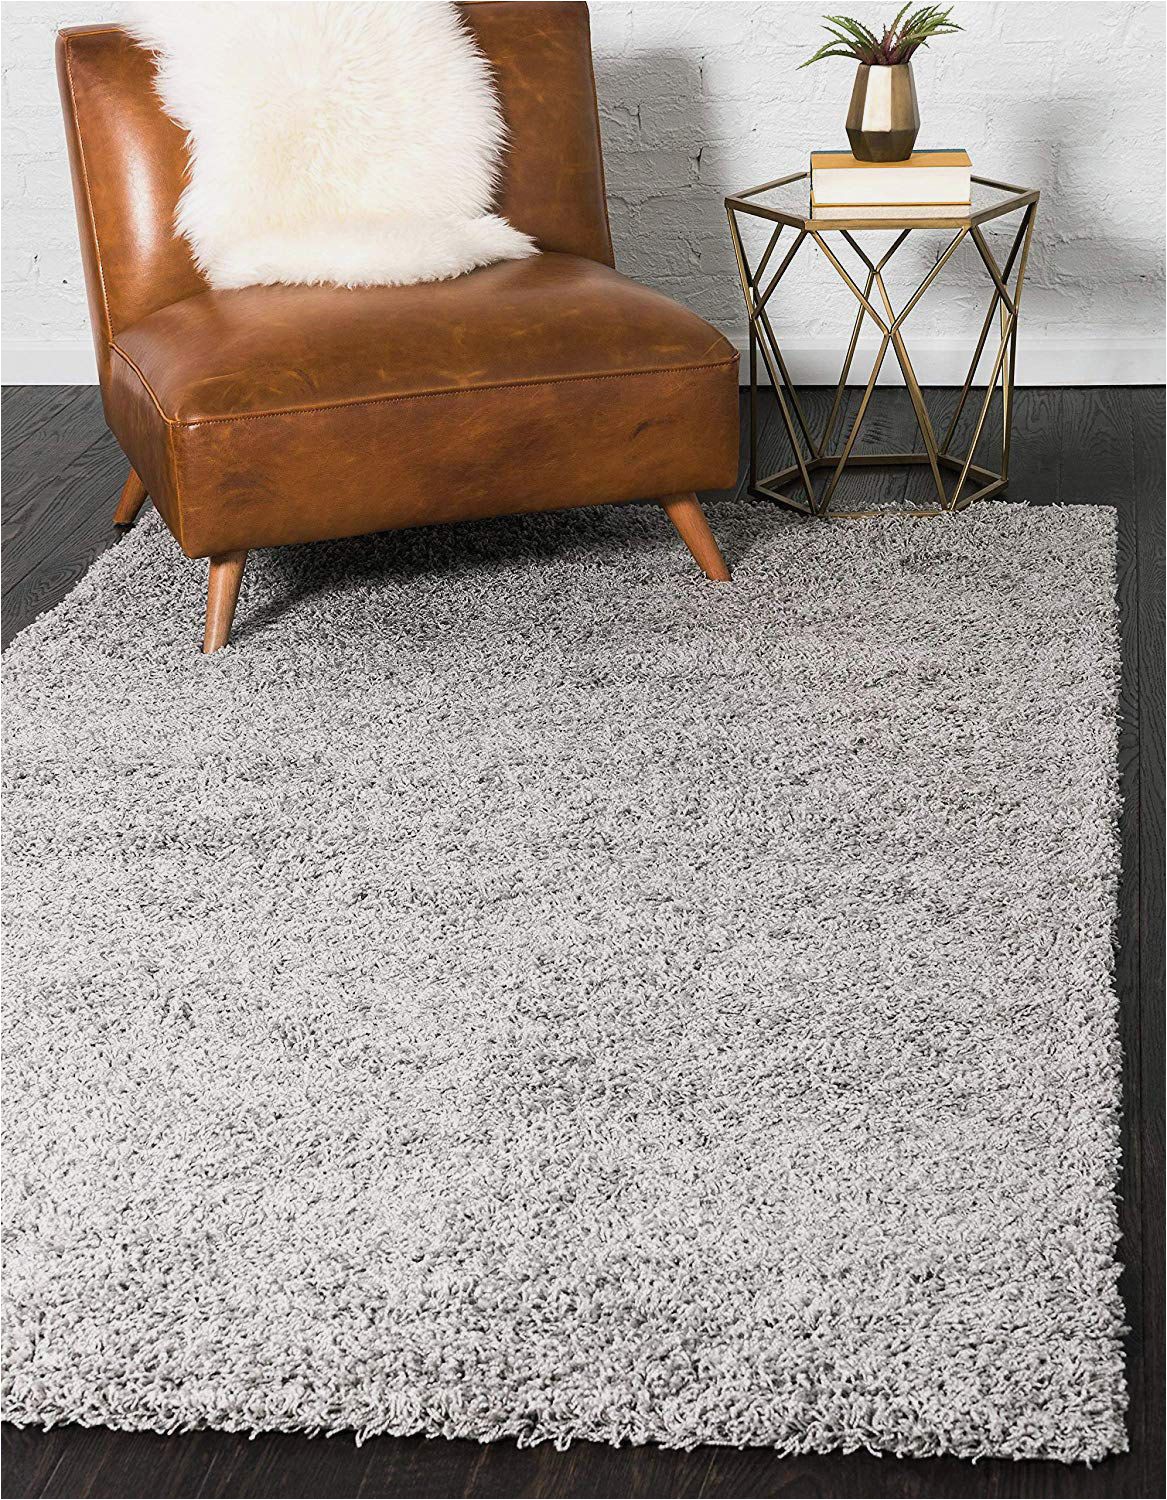 5×7 area Rugs Near Me 11 Best area Rugs Under $200 2018 the Strategist